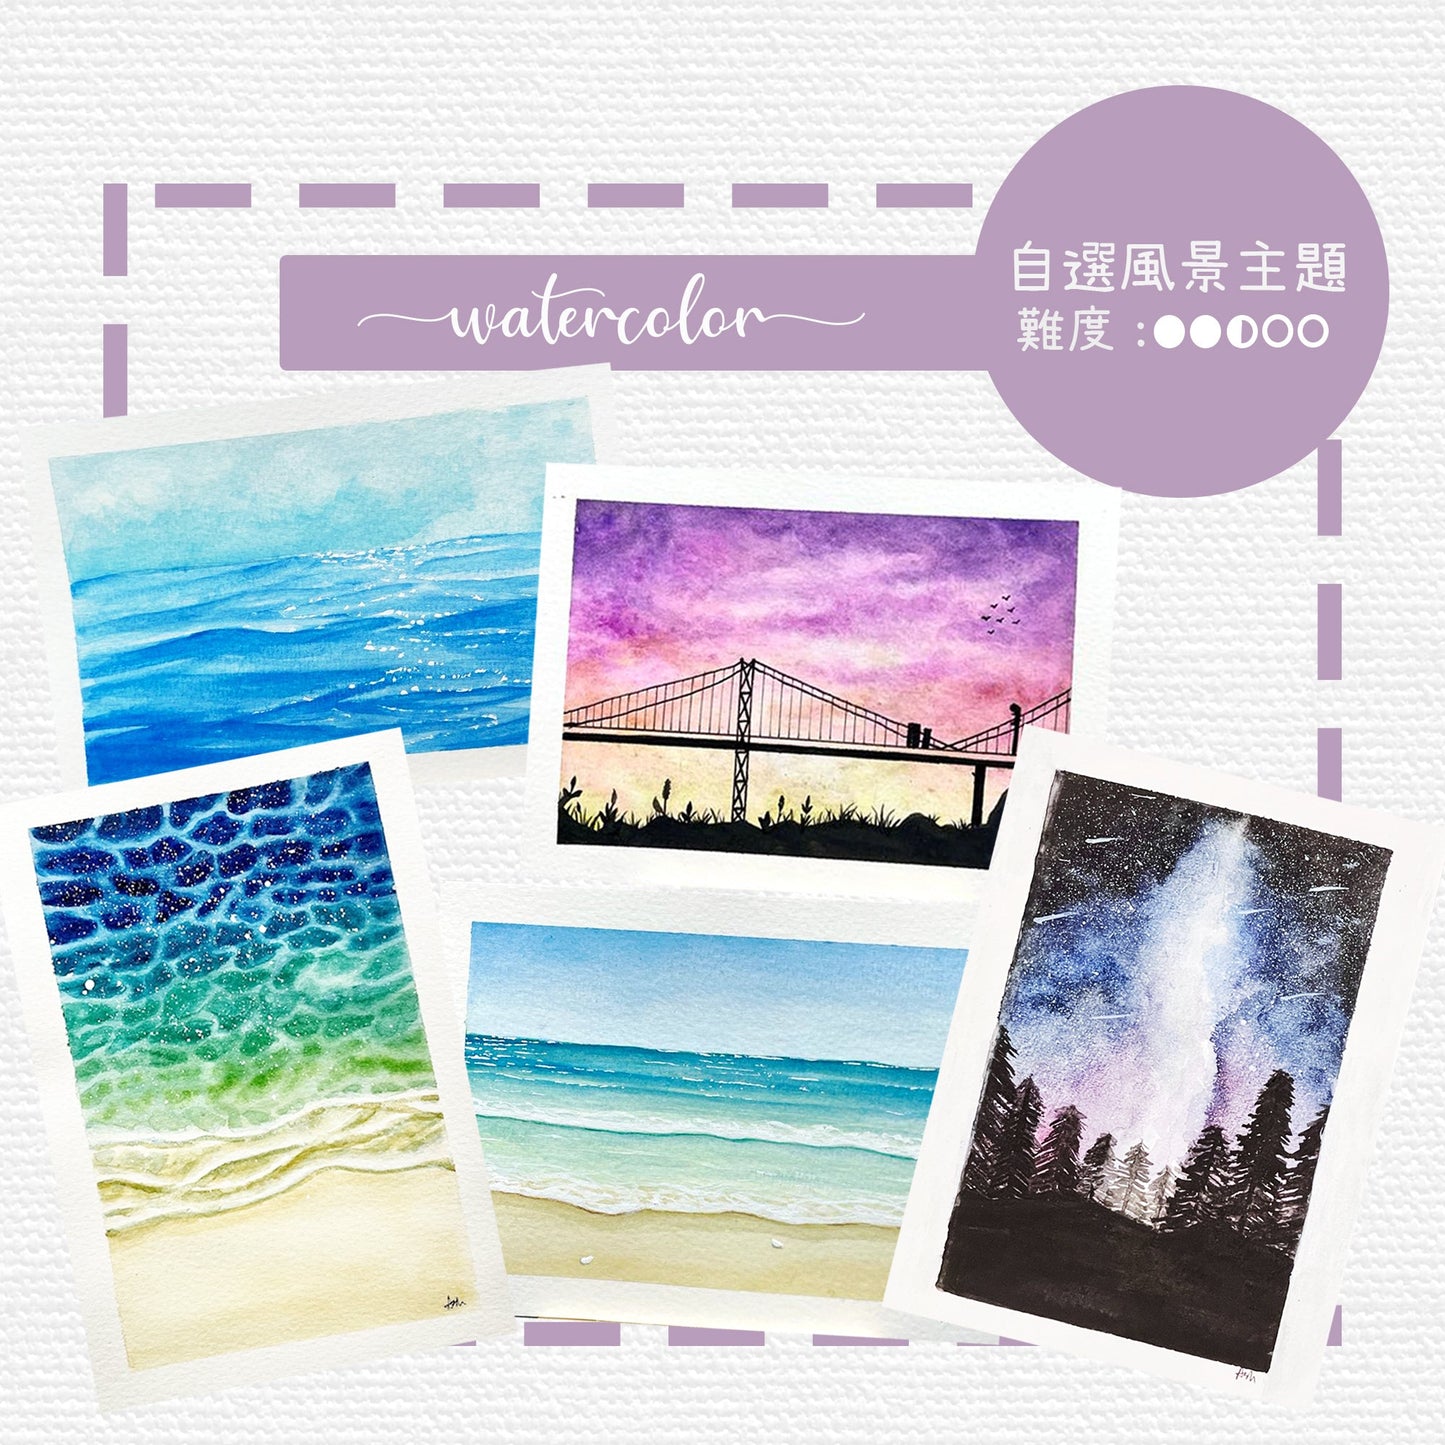 Watercolor Painting Class 水彩畫班